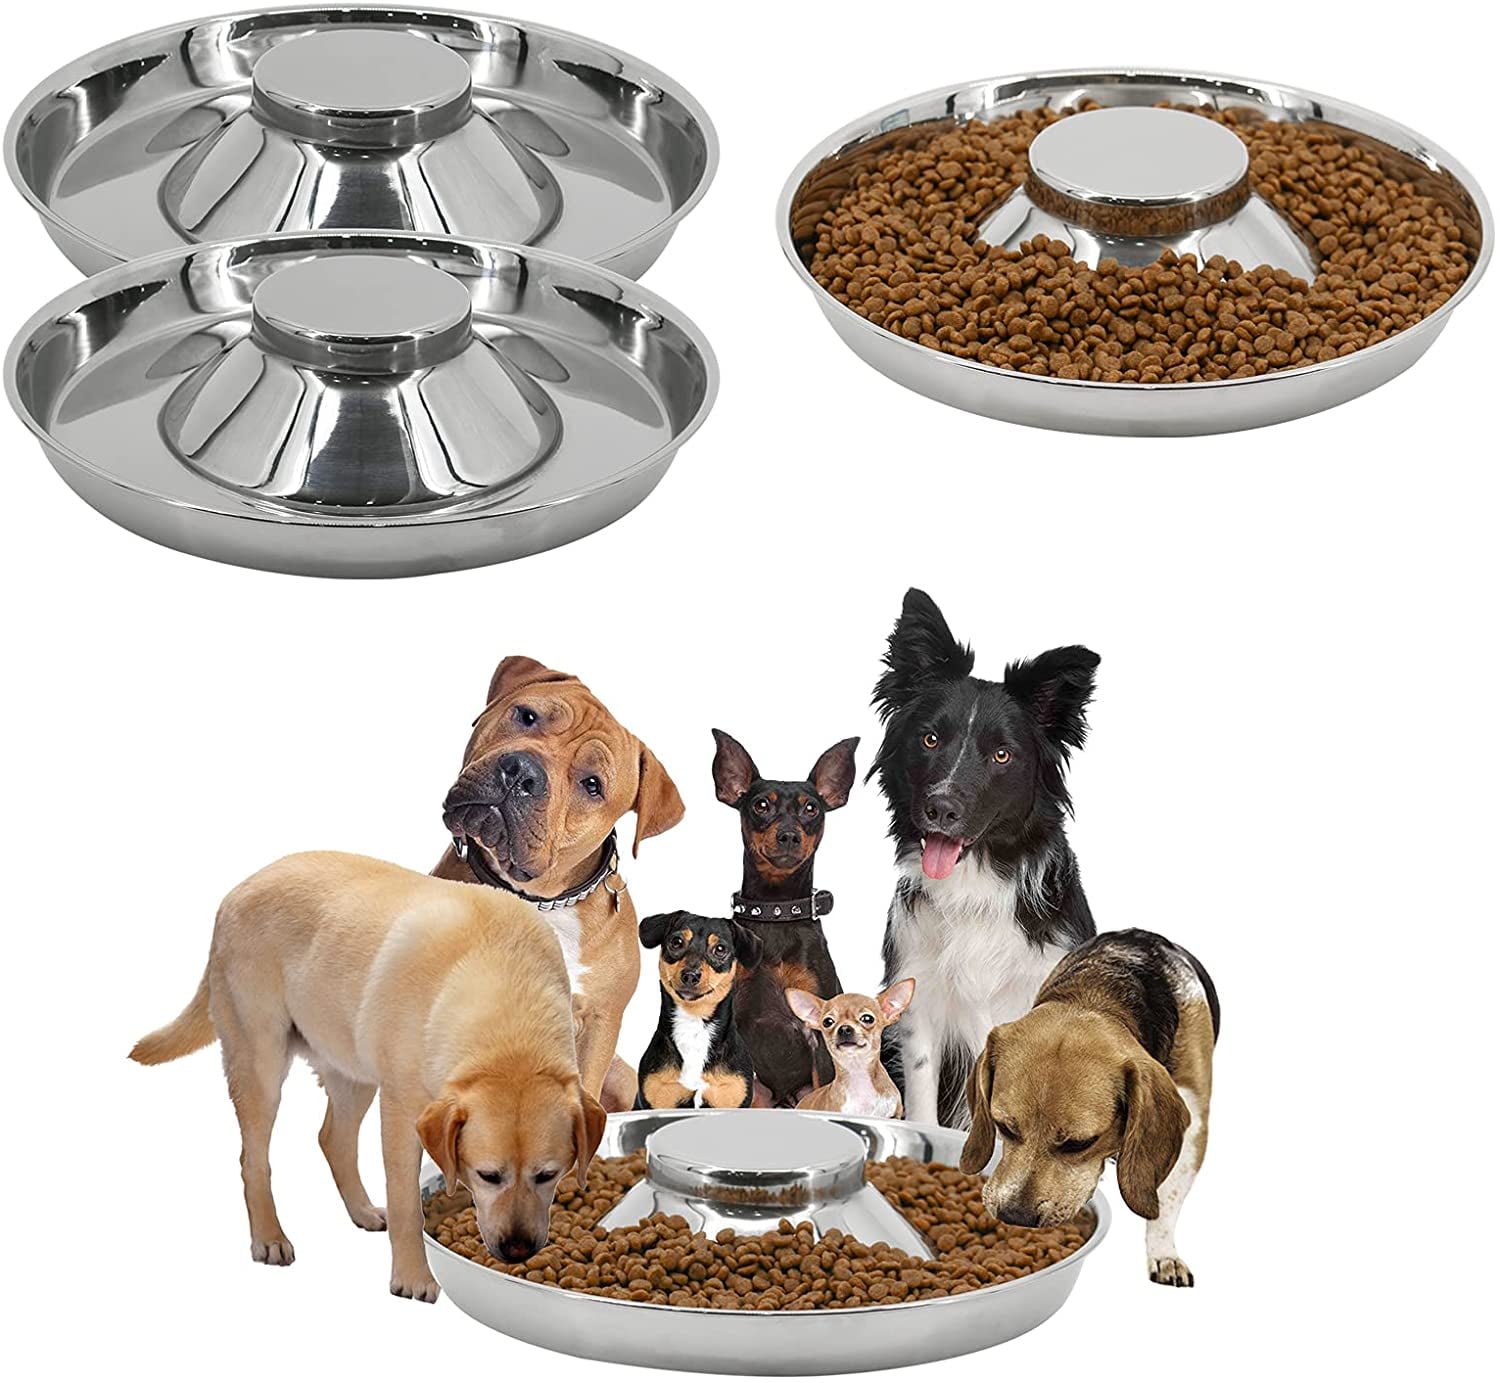 Dish dogs. Pet feeding. Pets Ceramic Double Bowl Dog Cat food Water Feeder Stand raised Ceramic dish Bowl Wooden Dining Table Pet Supplies.